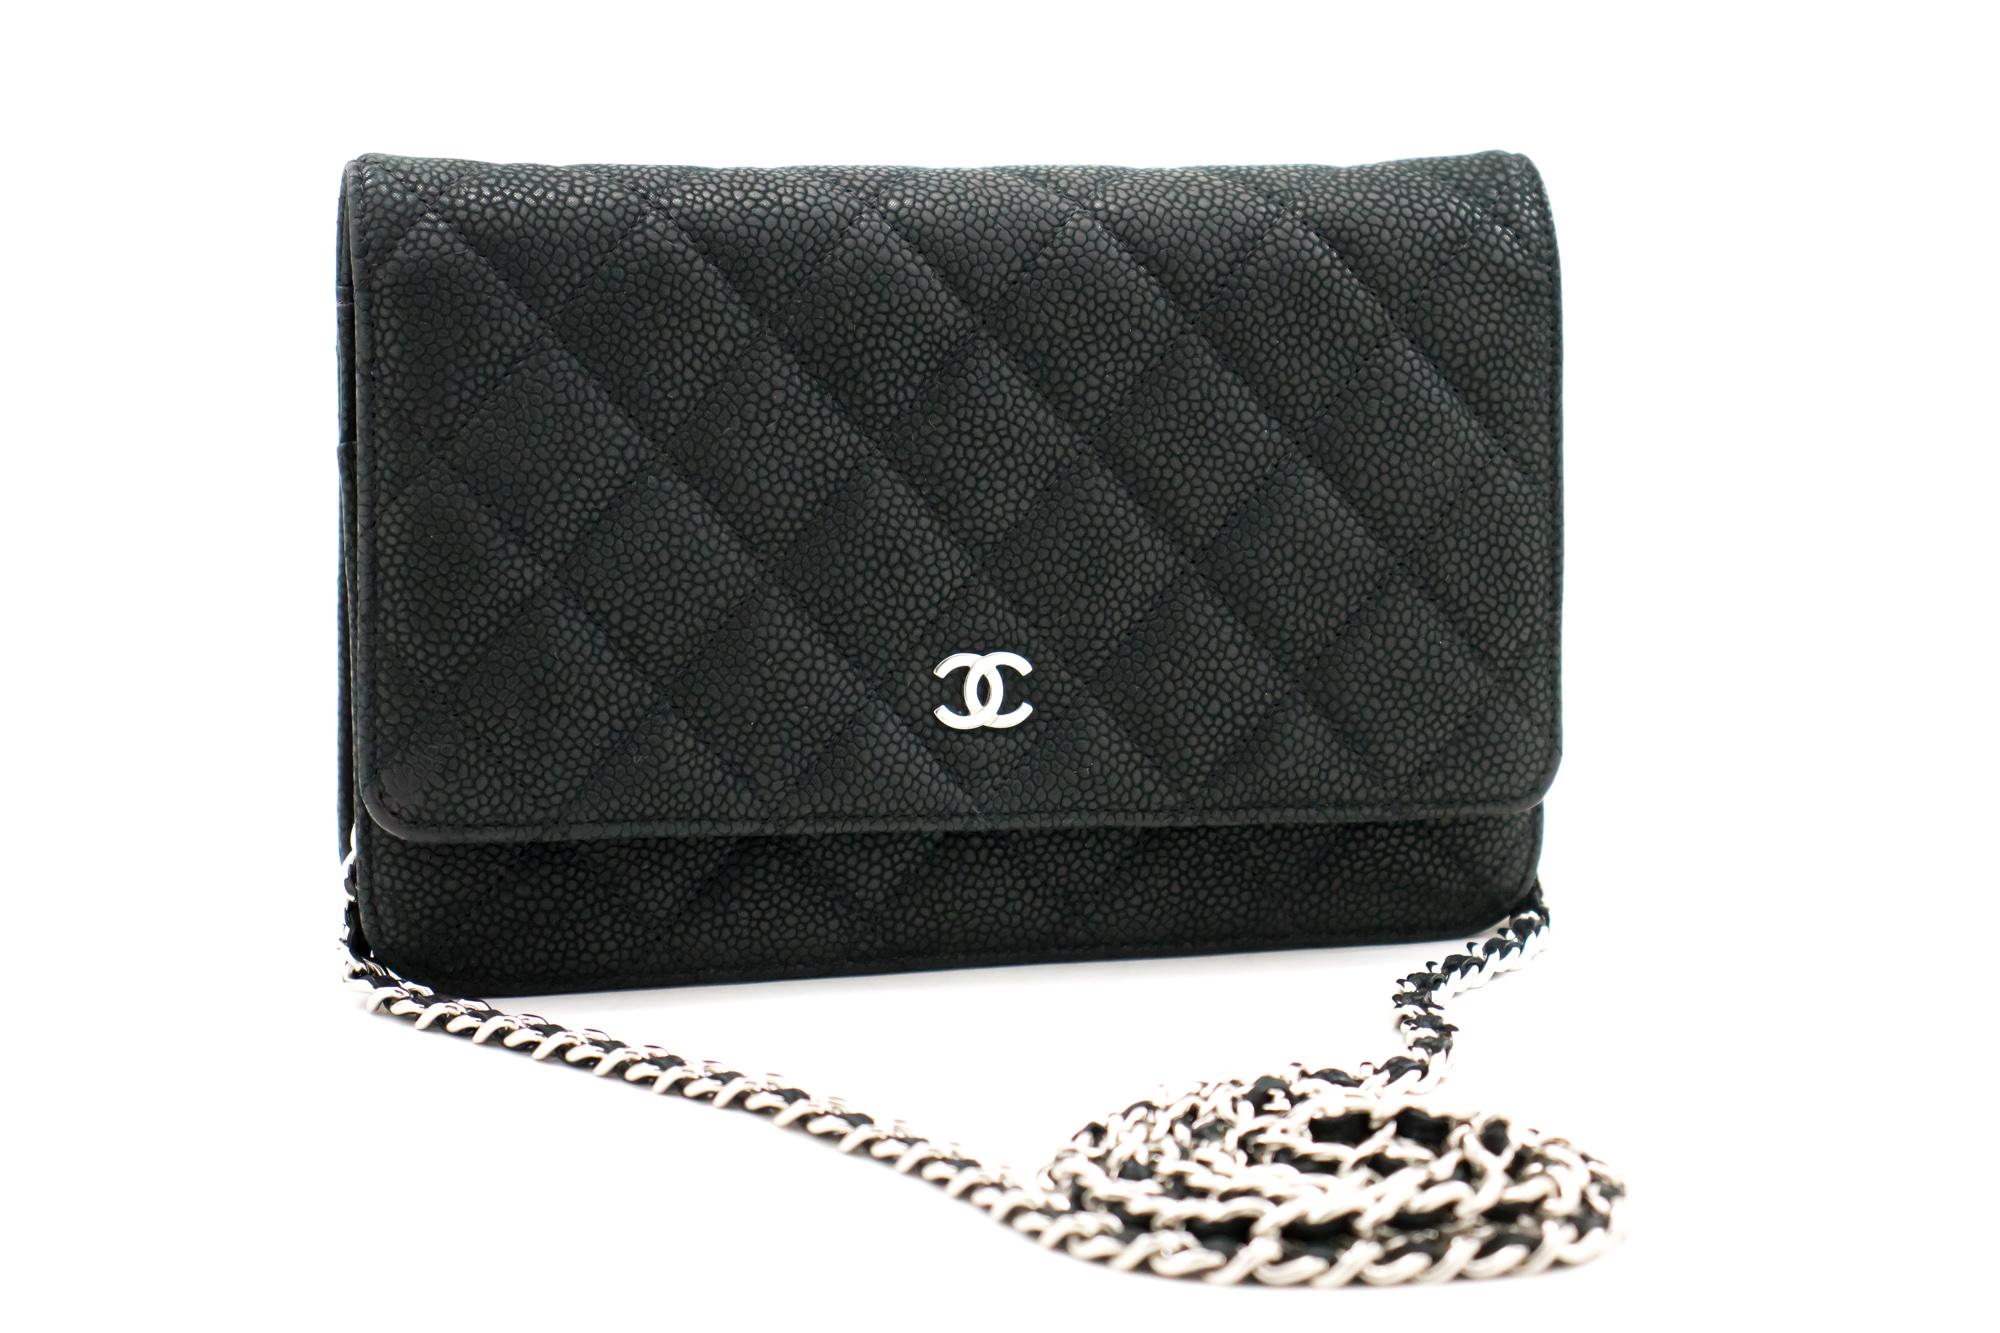 An authentic CHANEL Caviar Wallet On Chain WOC Dark Green Shoulder Bag. The color is Dark Green. The outside material is Leather. The pattern is Solid. This item is Contemporary. The year of manufacture would be 2013.
Conditions & Ratings
Outside